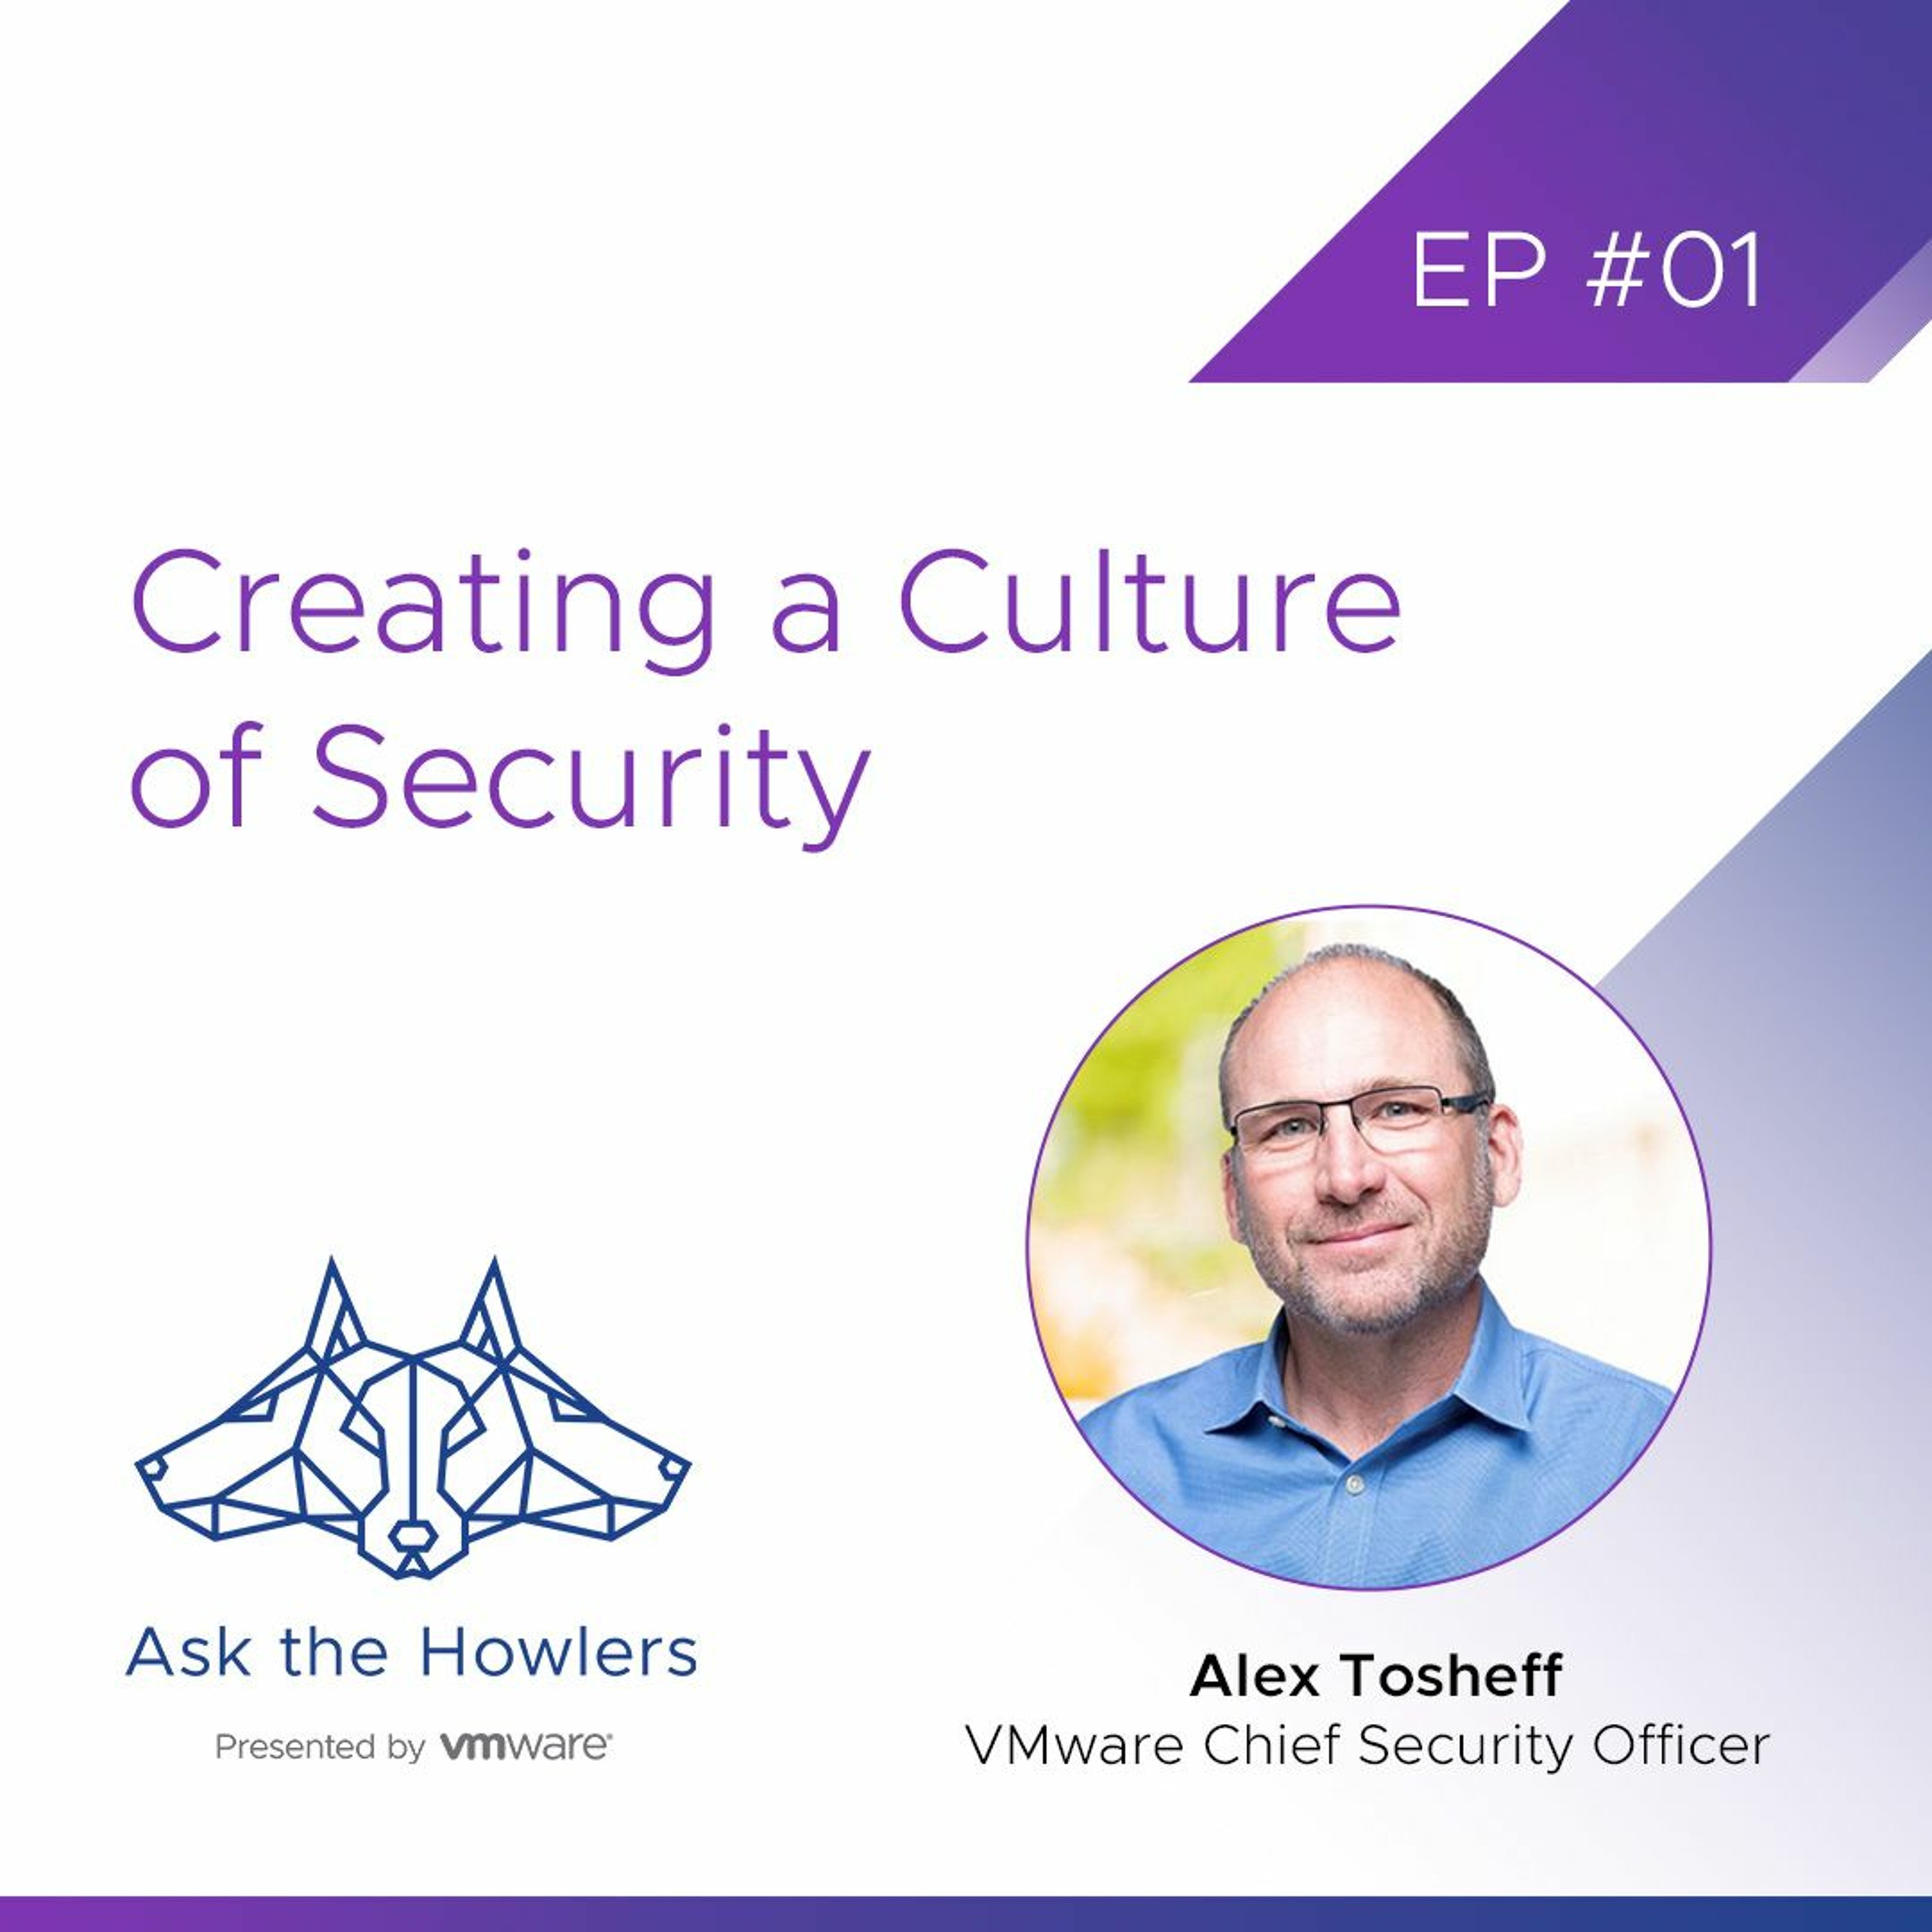 Ask The Howlers | Creating A Culture of Security with Alex Tosheff